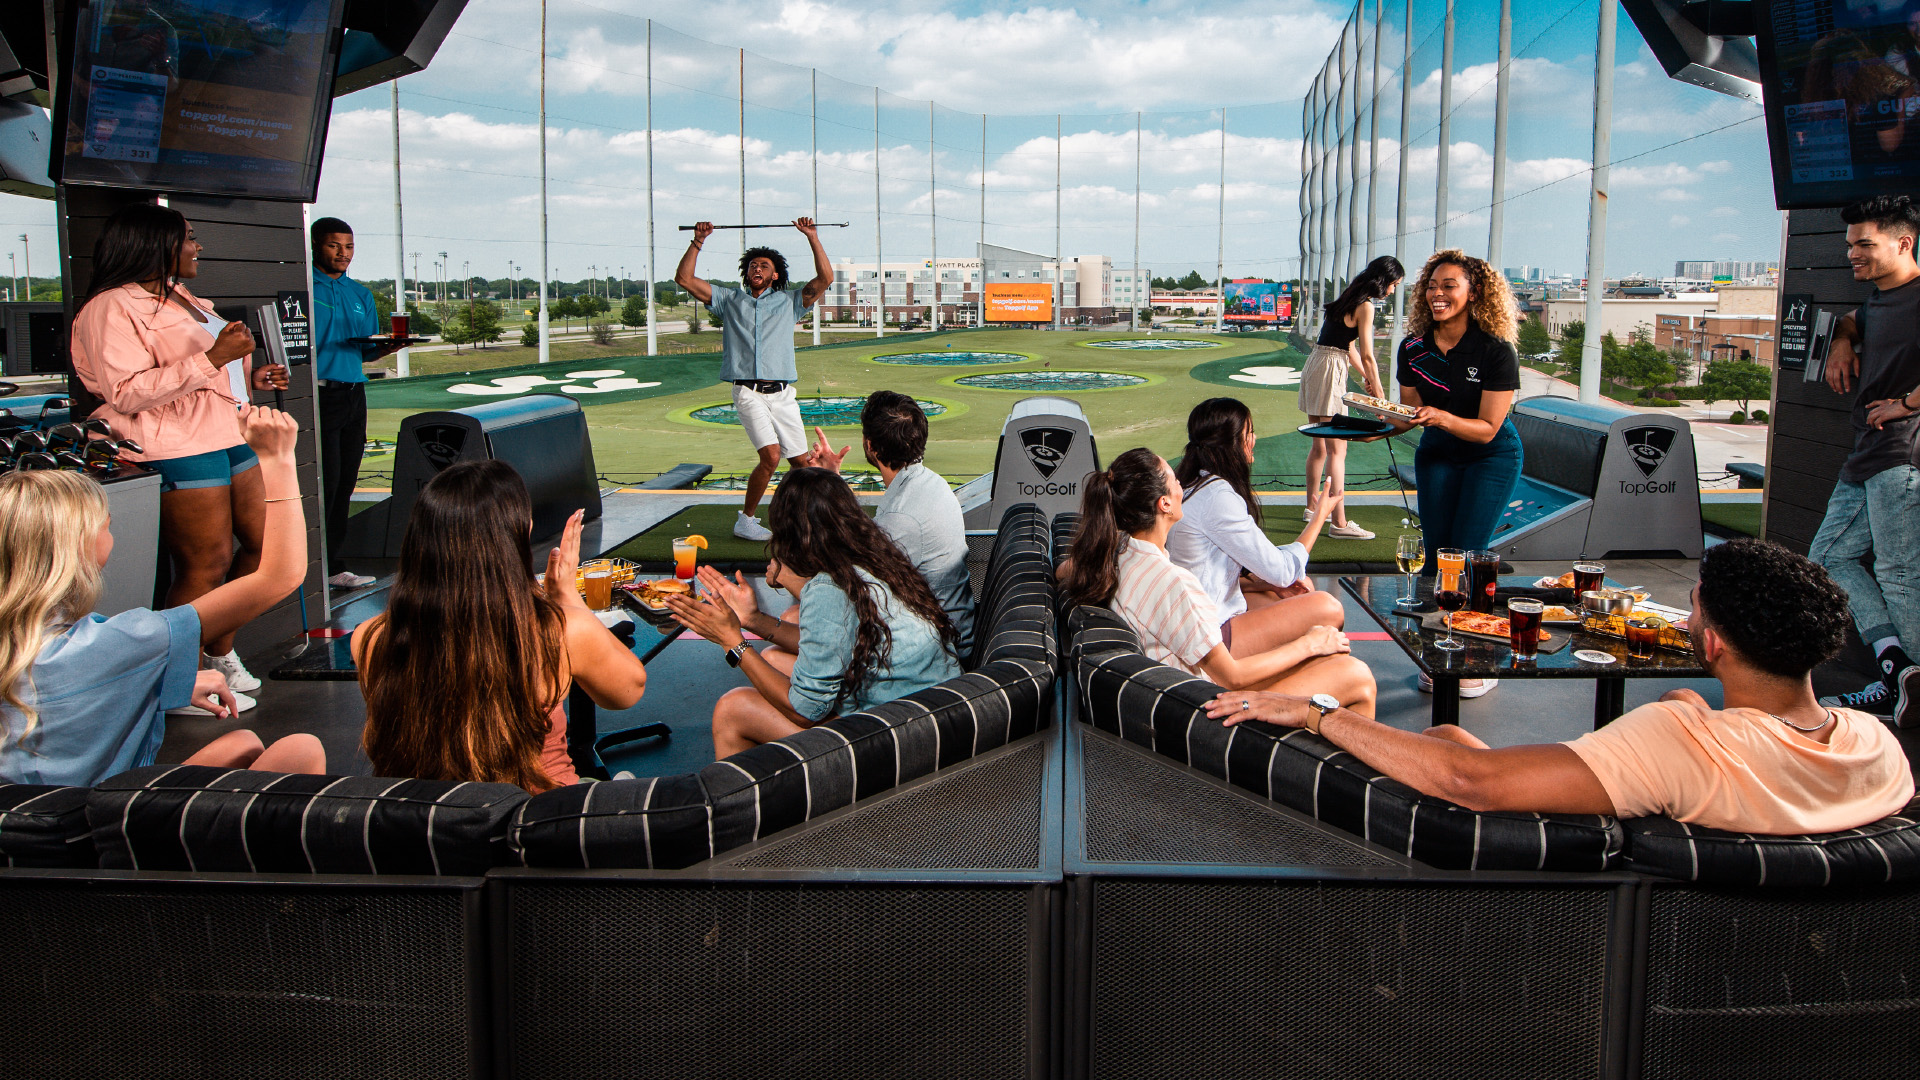 A group seated around a table reacts to a shot at TopGolf in Jacksonville, Florida, with the large green driving range in the background